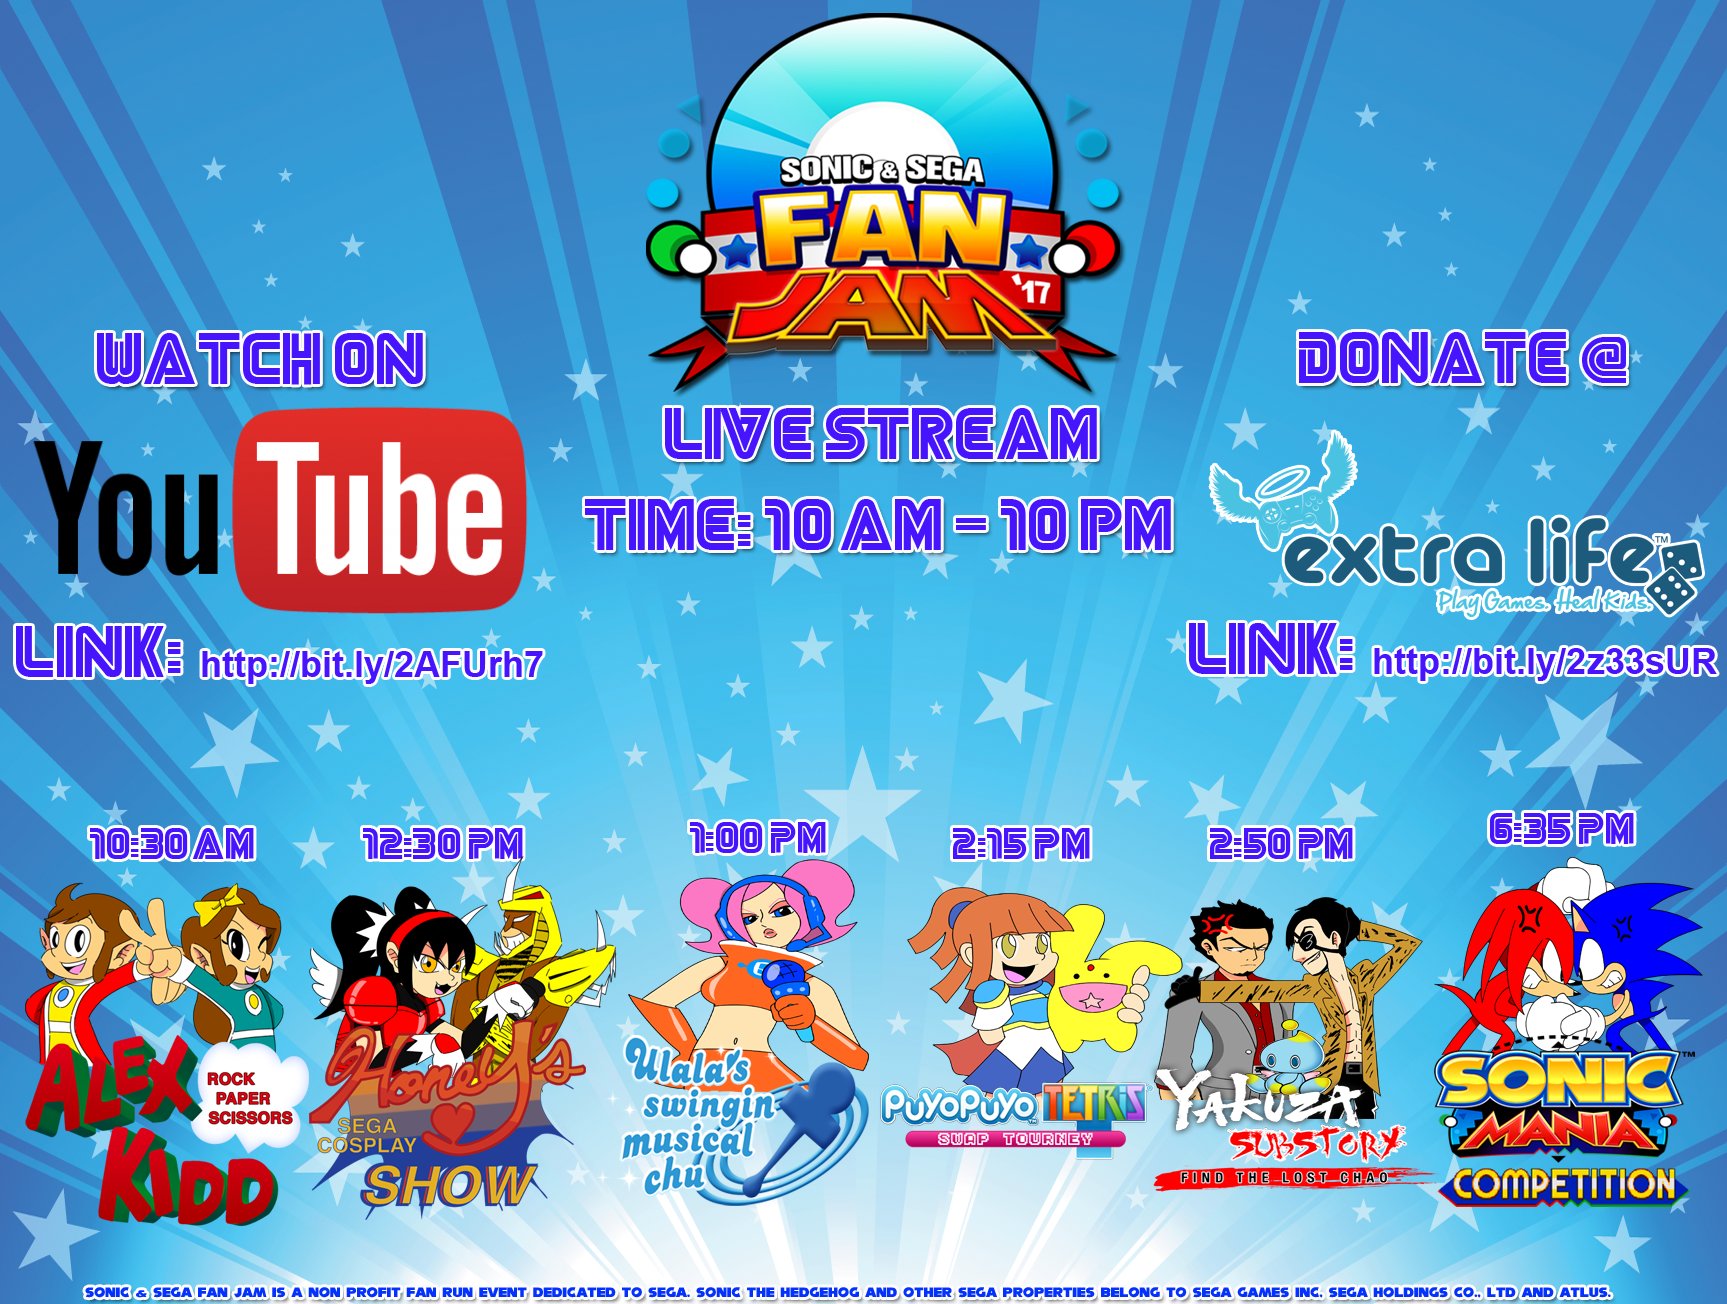 Sonic EXPO Atlanta on X: 🔔SCHEDULE ANNOUNCEMENT: The wait is finally  over! Here is our full schedule for Sonic & SEGA #FanJamREMIX! See ya  there! Which panel are you excited for? Stream